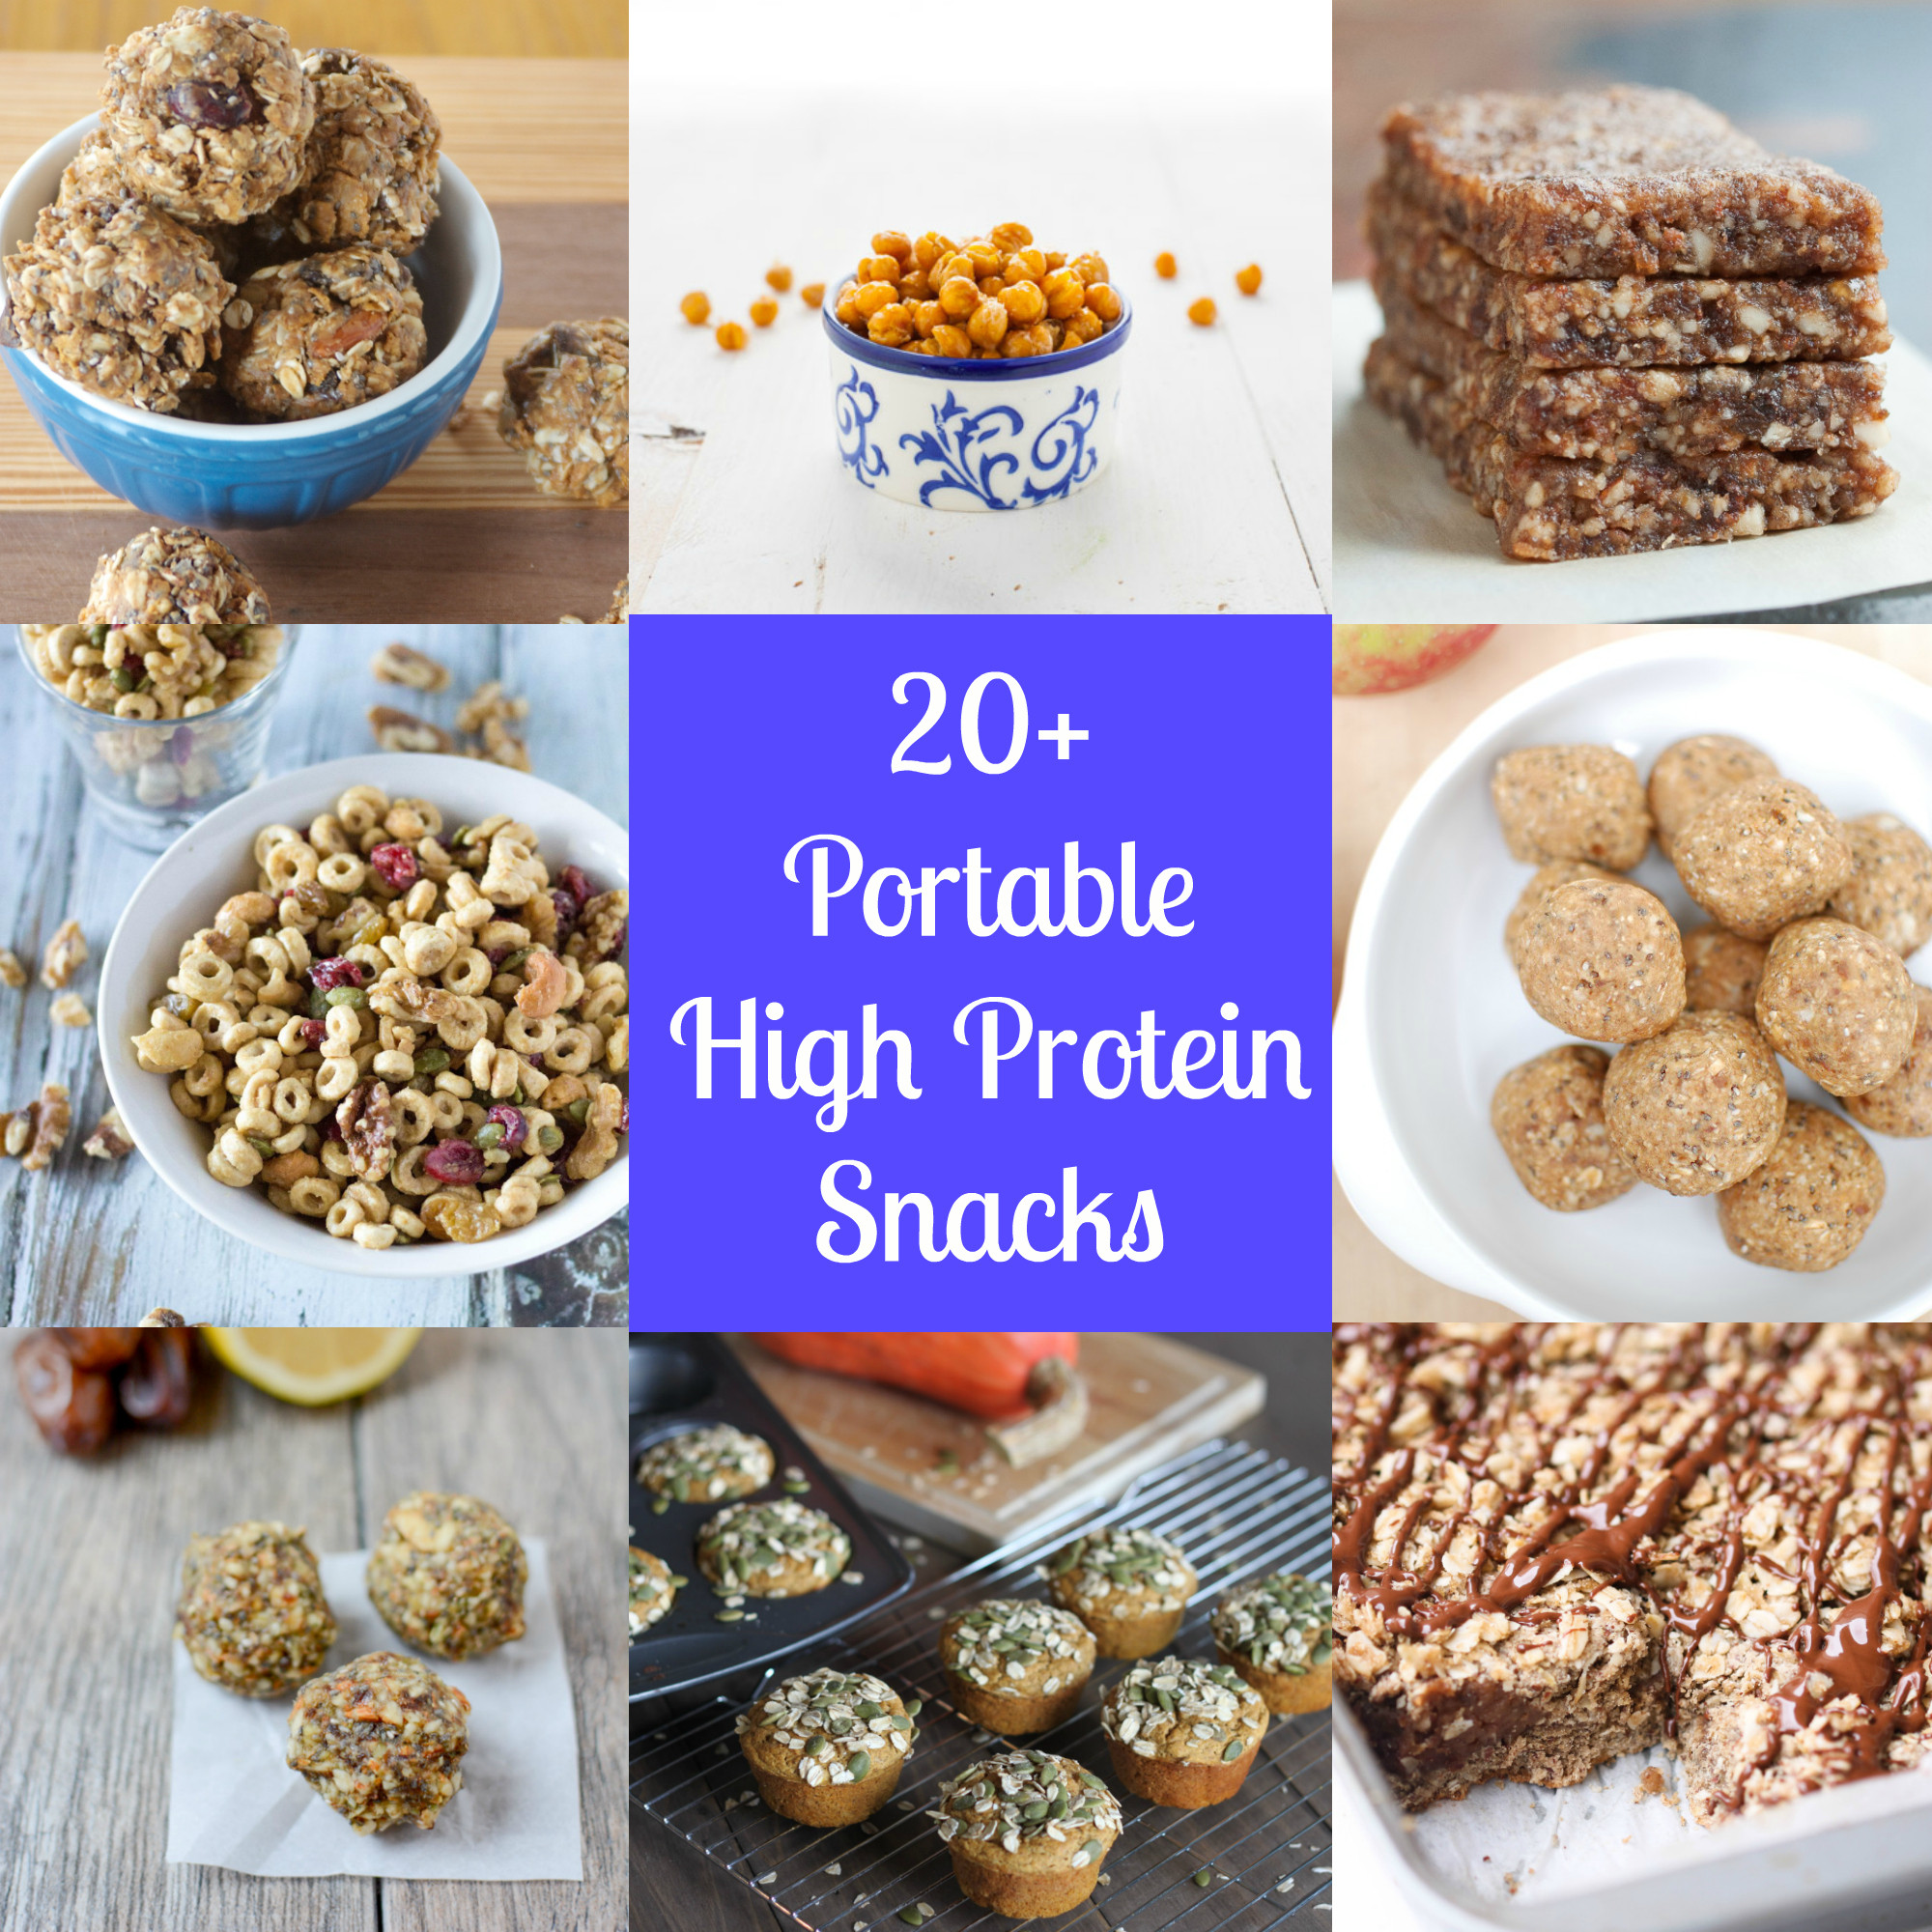 Healthy Protein Snacks
 Portable High Protein Snacks